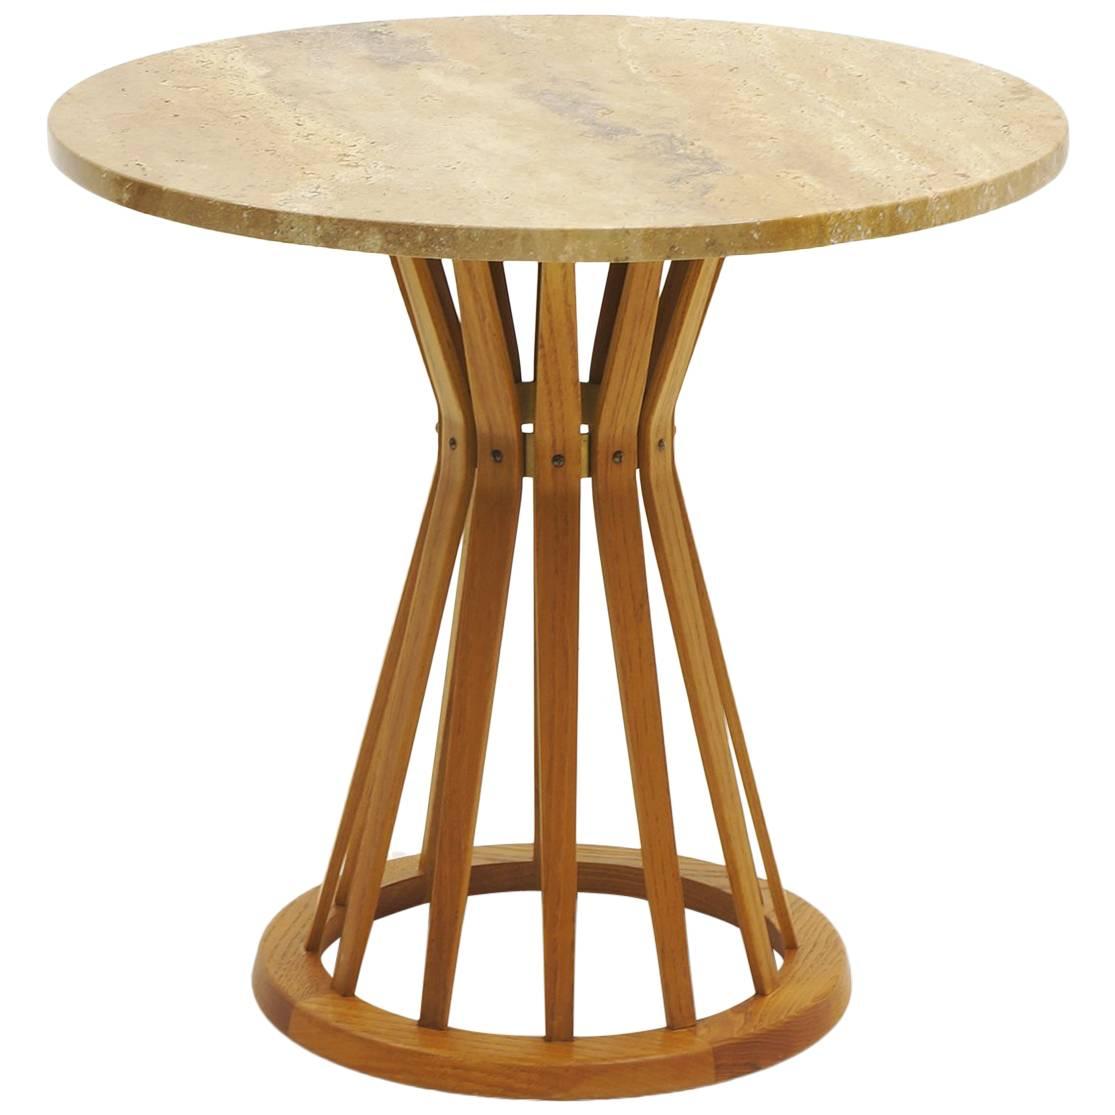 Large Sheaf of Wheat Occasional Table Designed by Edward Wormley for Dunbar